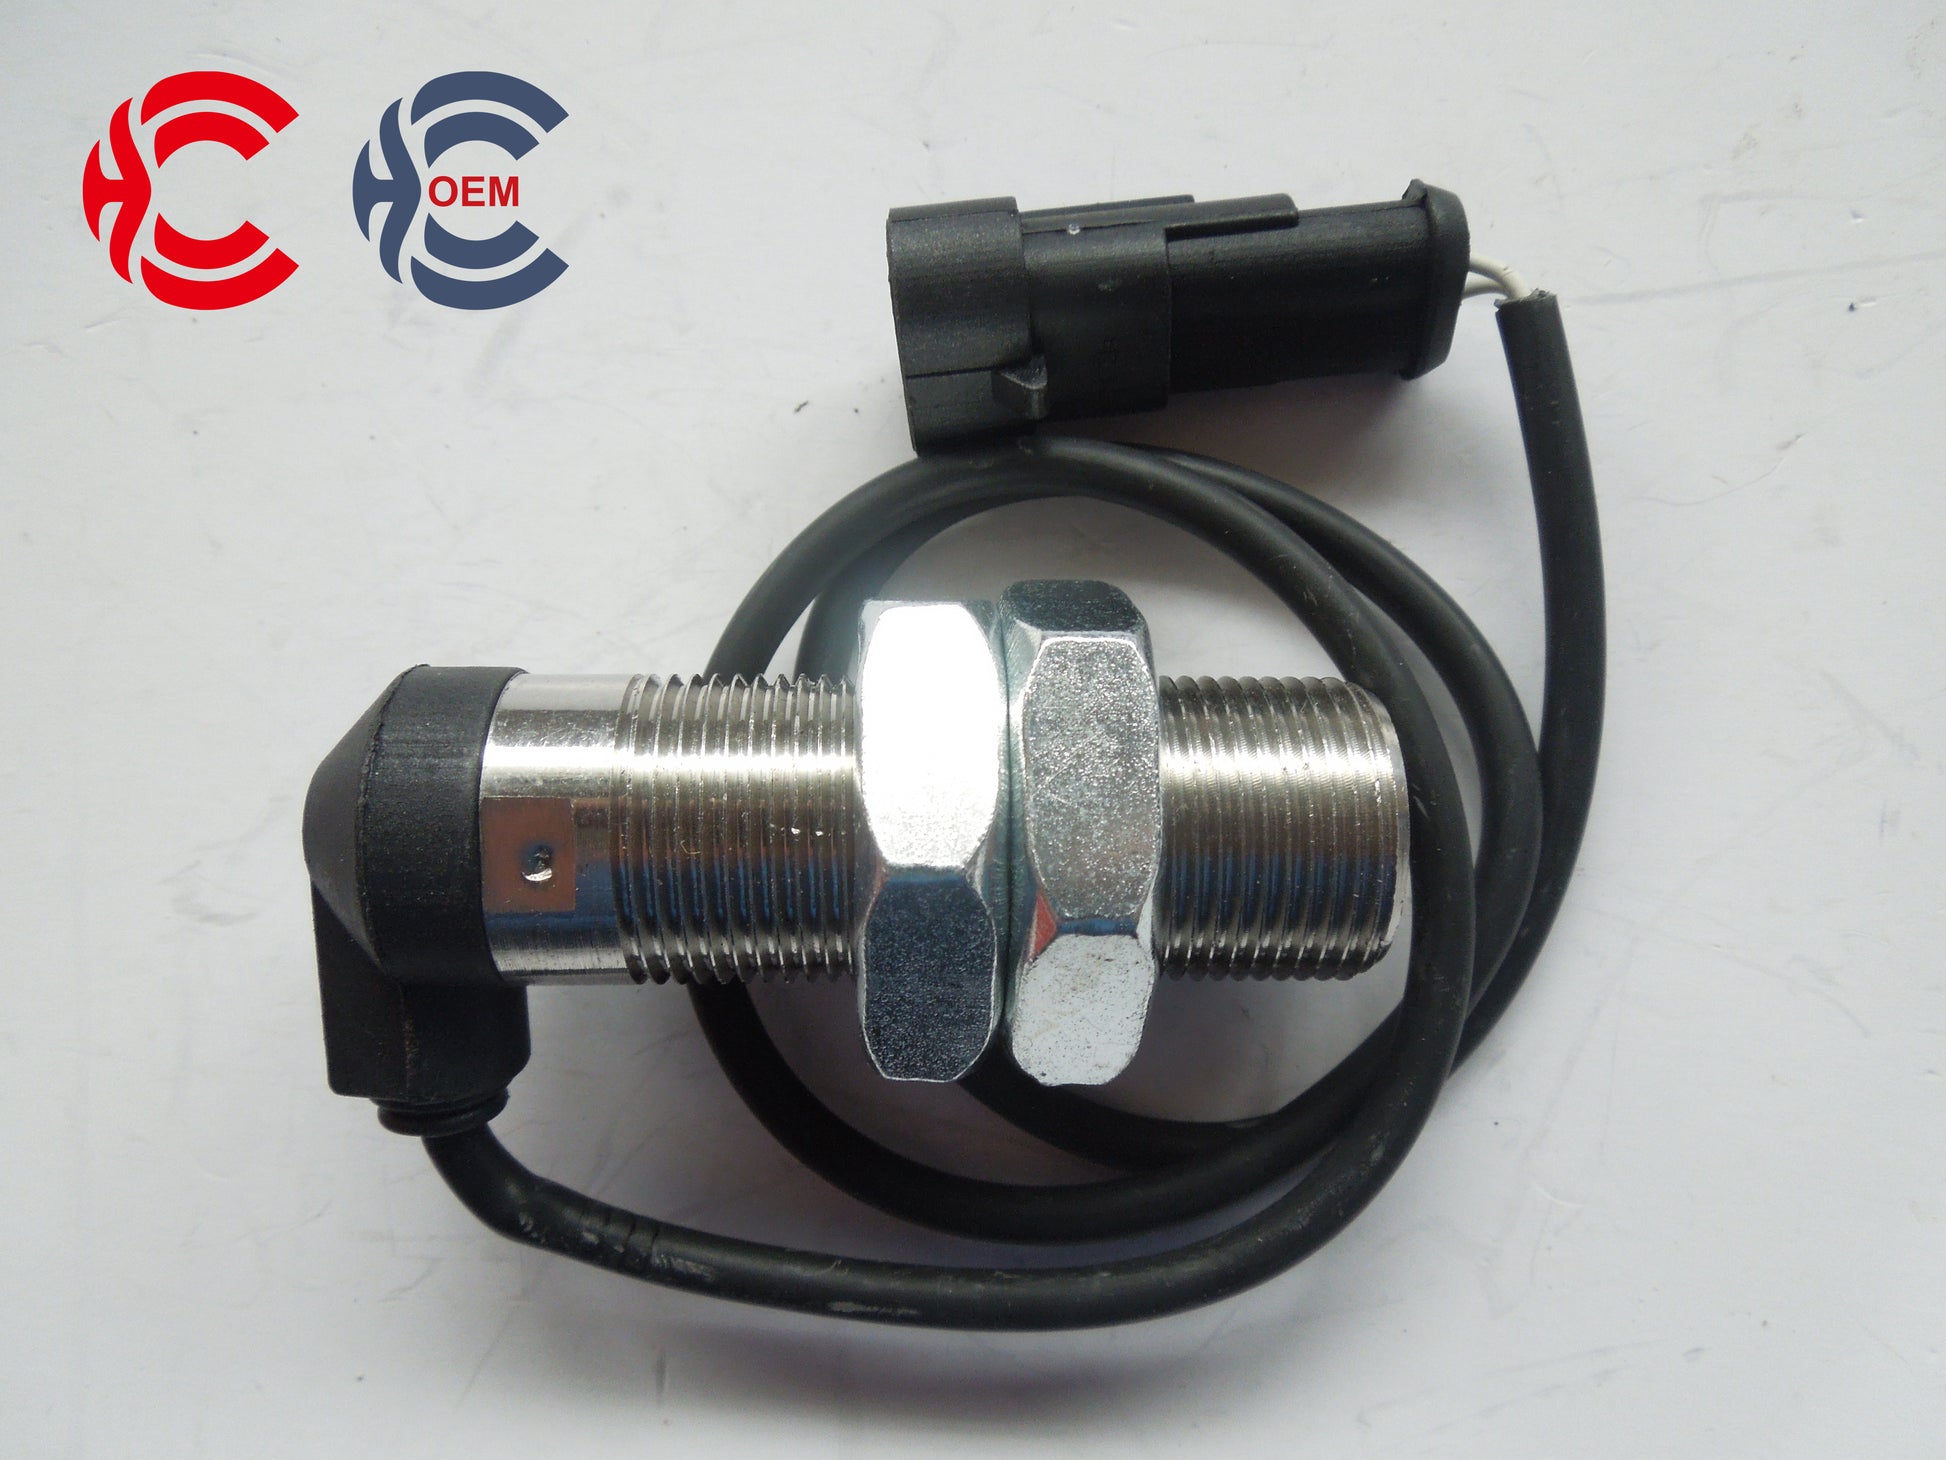 OEM: WT-TELMA RETARDERMaterial: ABS MetalColor: black silver goldenOrigin: Made in ChinaWeight: 100gPacking List: 1* Tachometric Transducer Magnetic Pick Up More ServiceWe can provide OEM Manufacturing serviceWe can Be your one-step solution for Auto PartsWe can provide technical scheme for you Feel Free to Contact Us, We will get back to you as soon as possible.